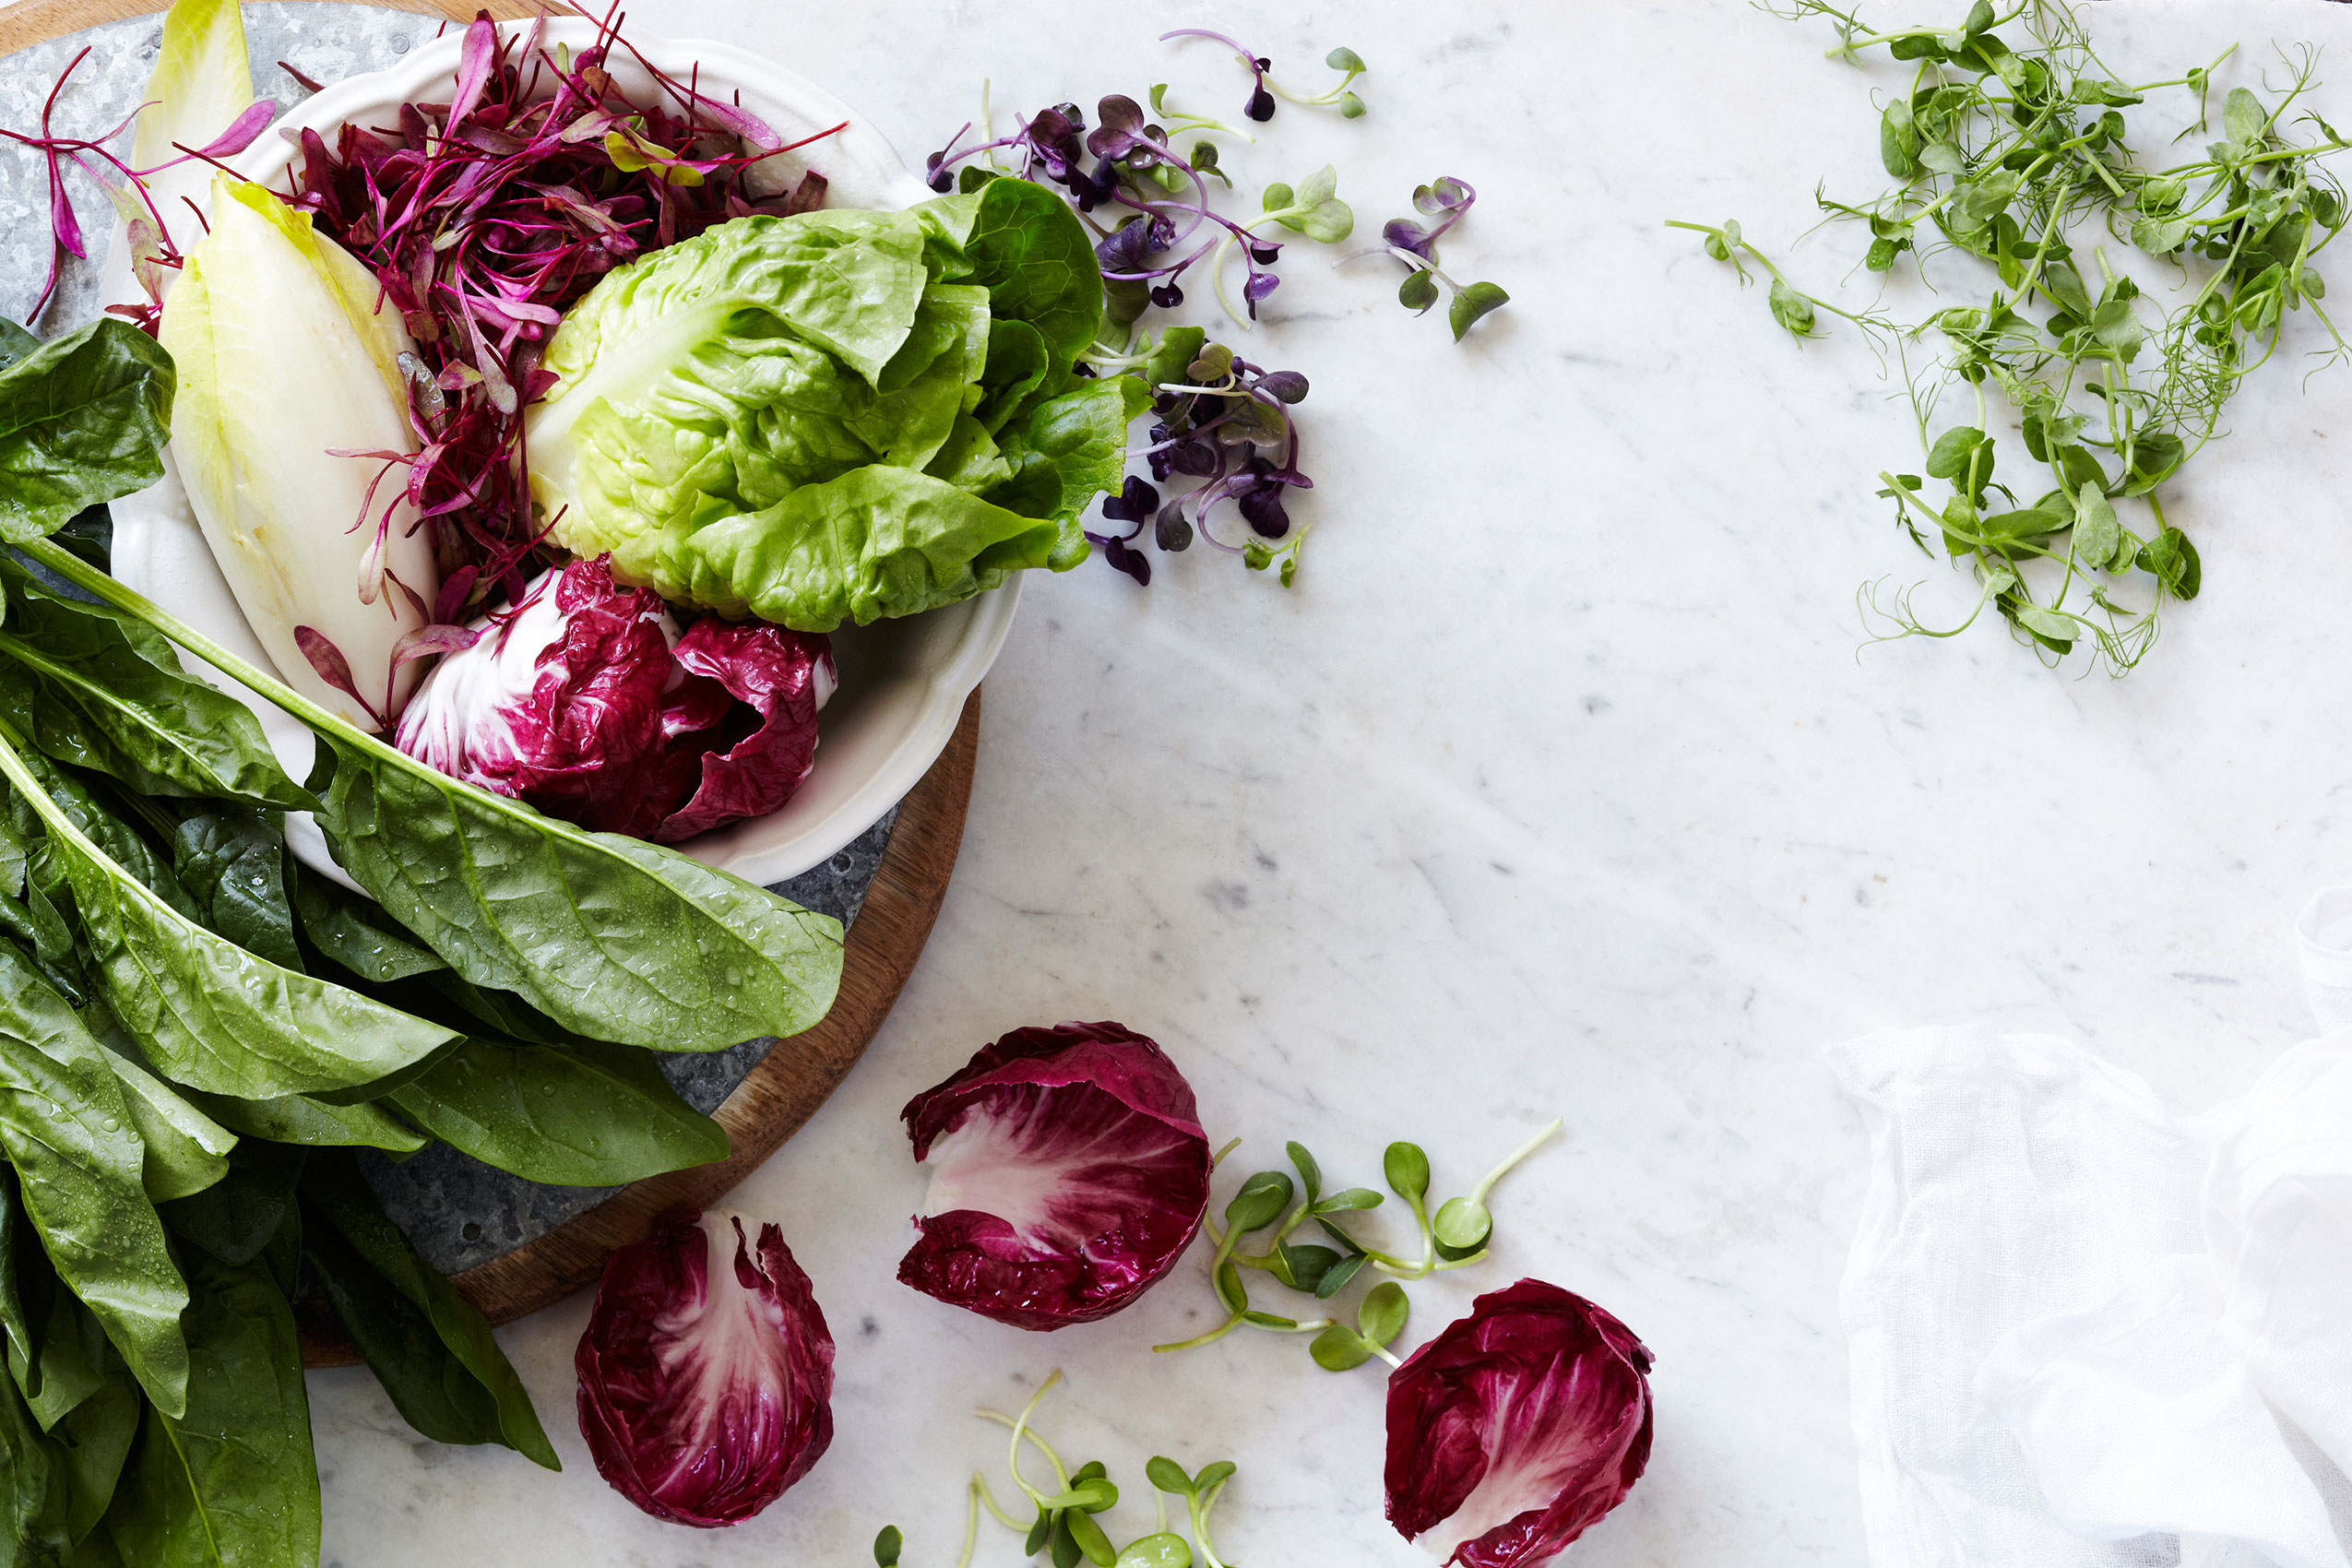 Simple Salads • Health Conscious Fresh Leafy Green & Purple Vegetables • Cookbook & Editorial Food Photography